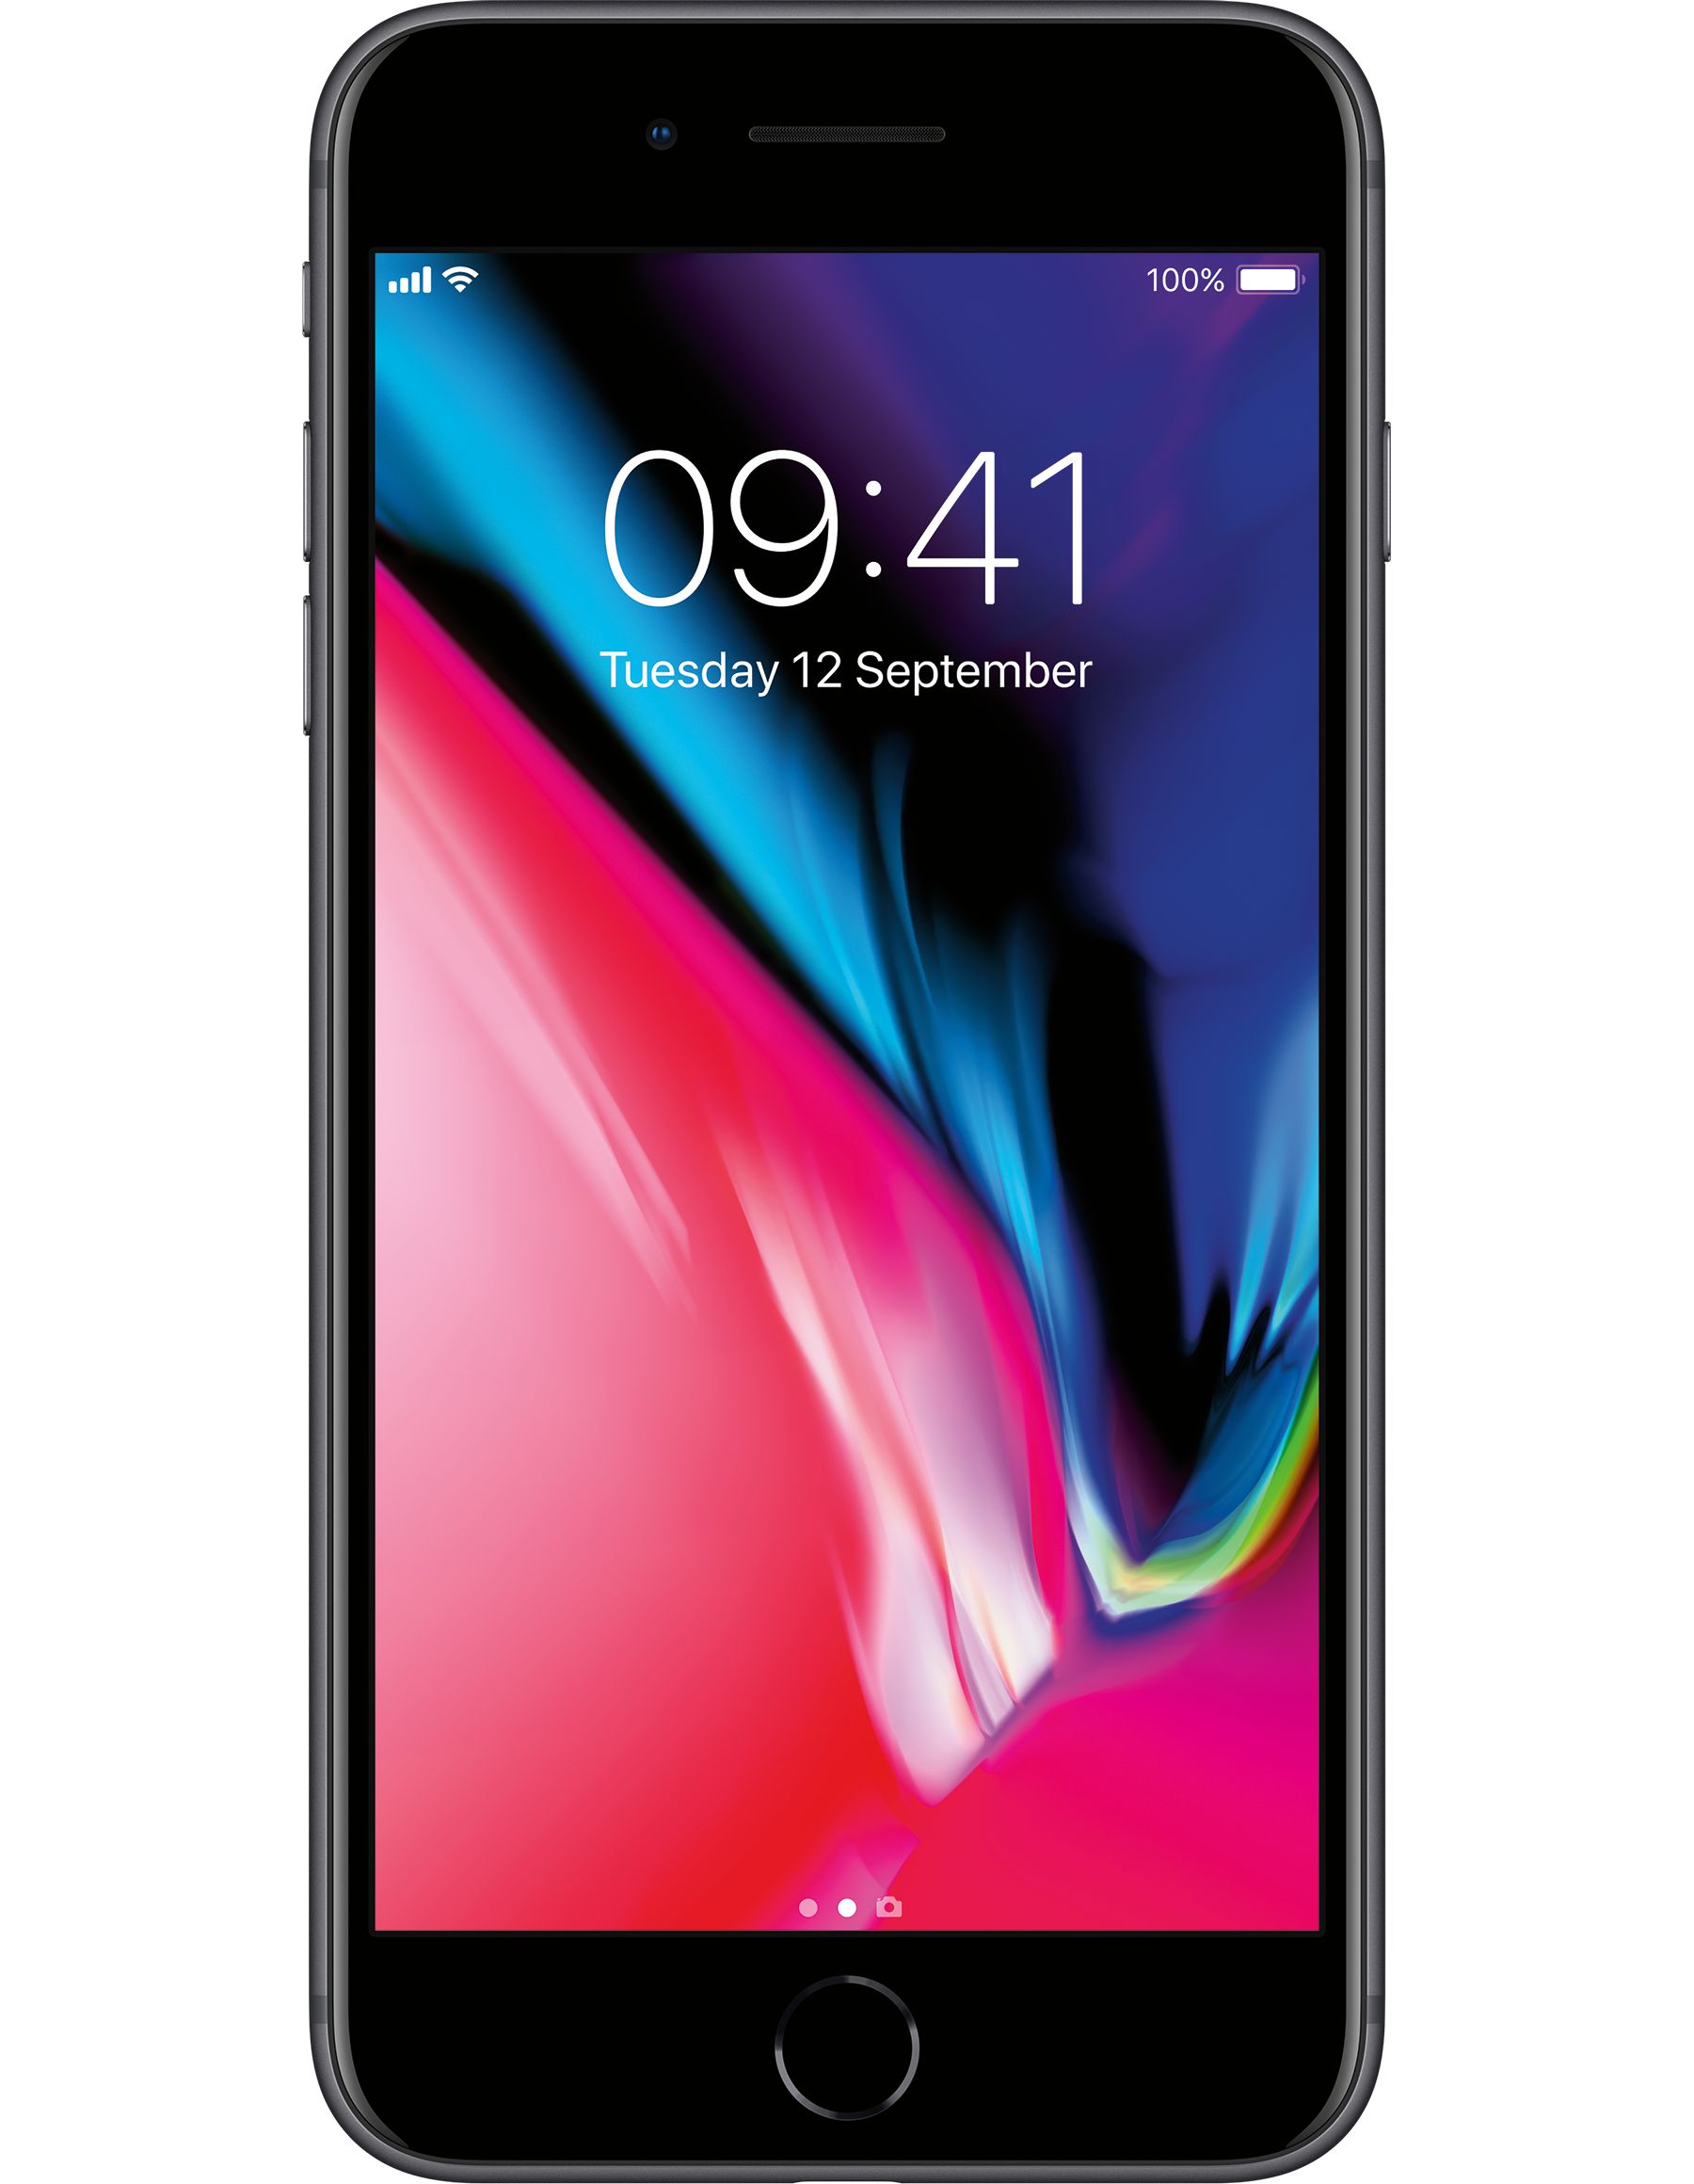 - Or pick up the iPhone 7, iPhone 8 or Samsung Galaxy S8, Note 8 on stonking deals